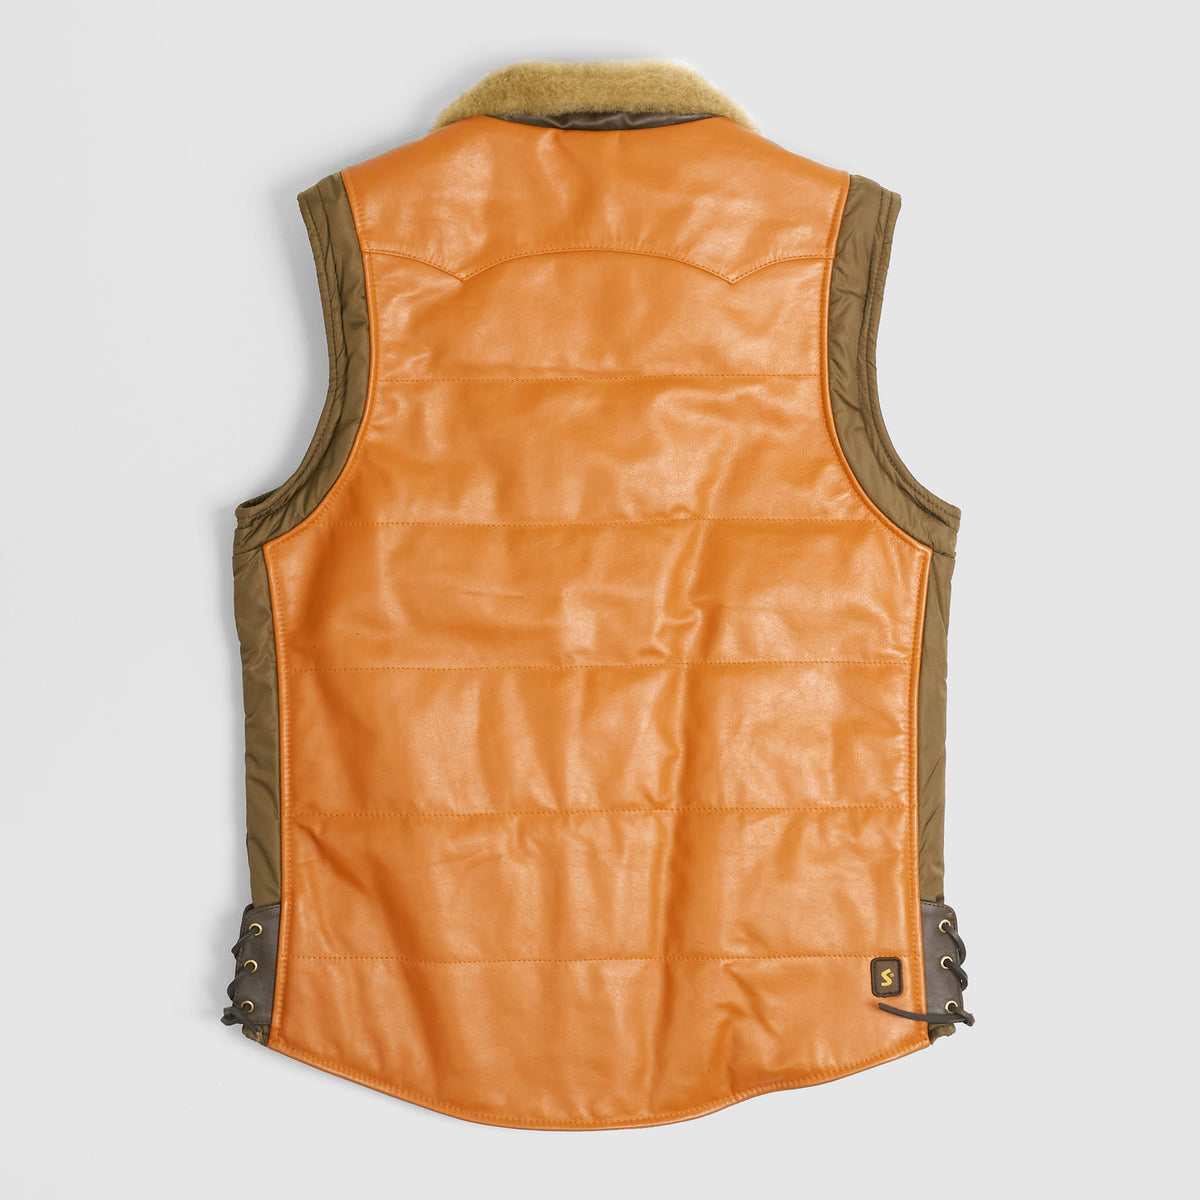 Schott N.Y.C. Padded Leather Jacket and Vest